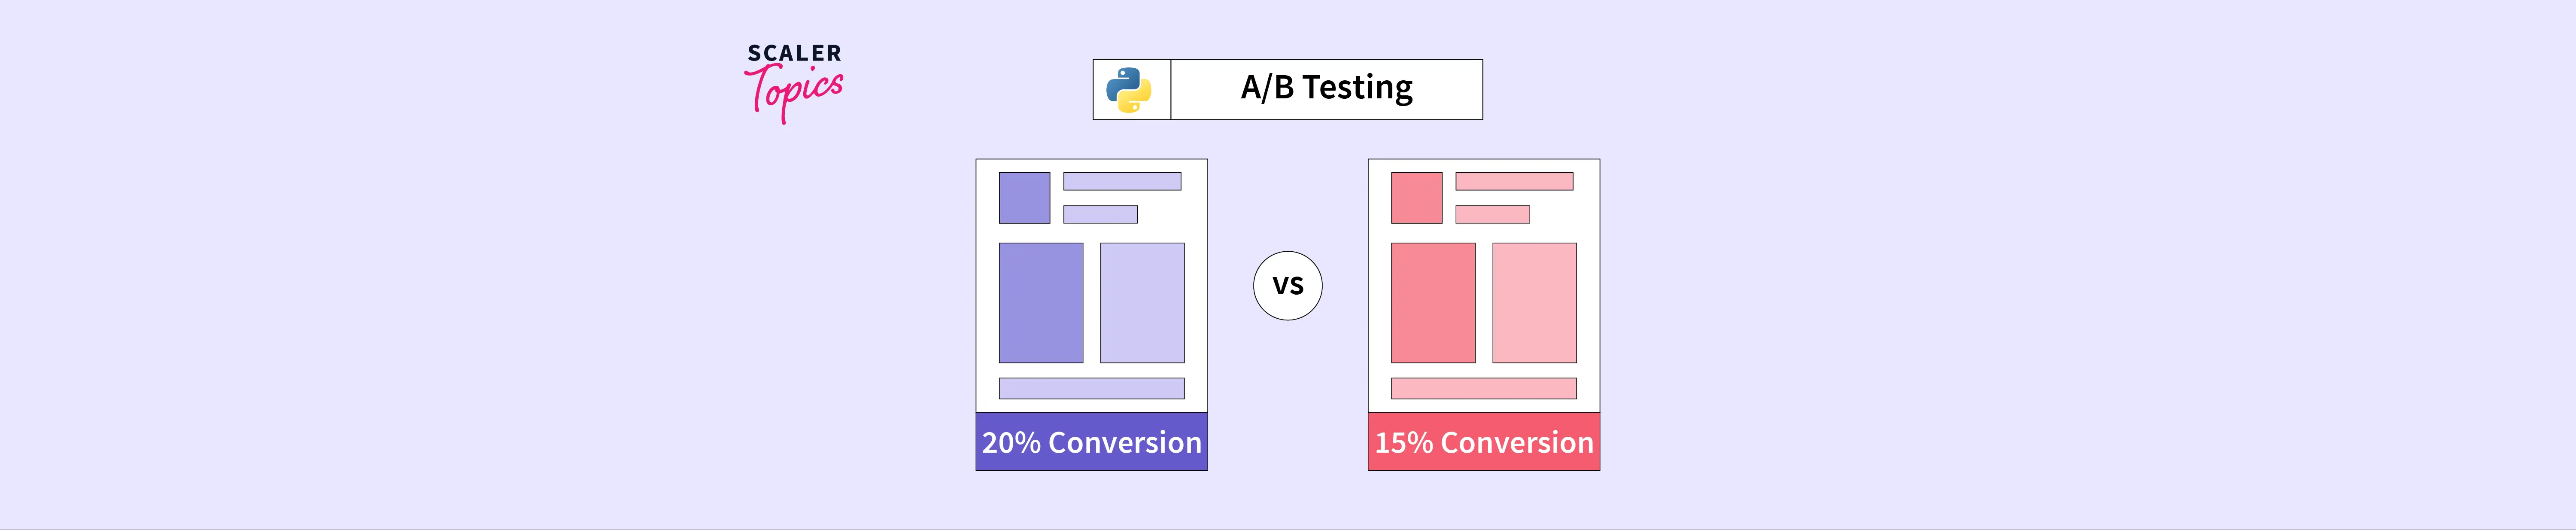 A/B Testing in Python - Scaler Topics